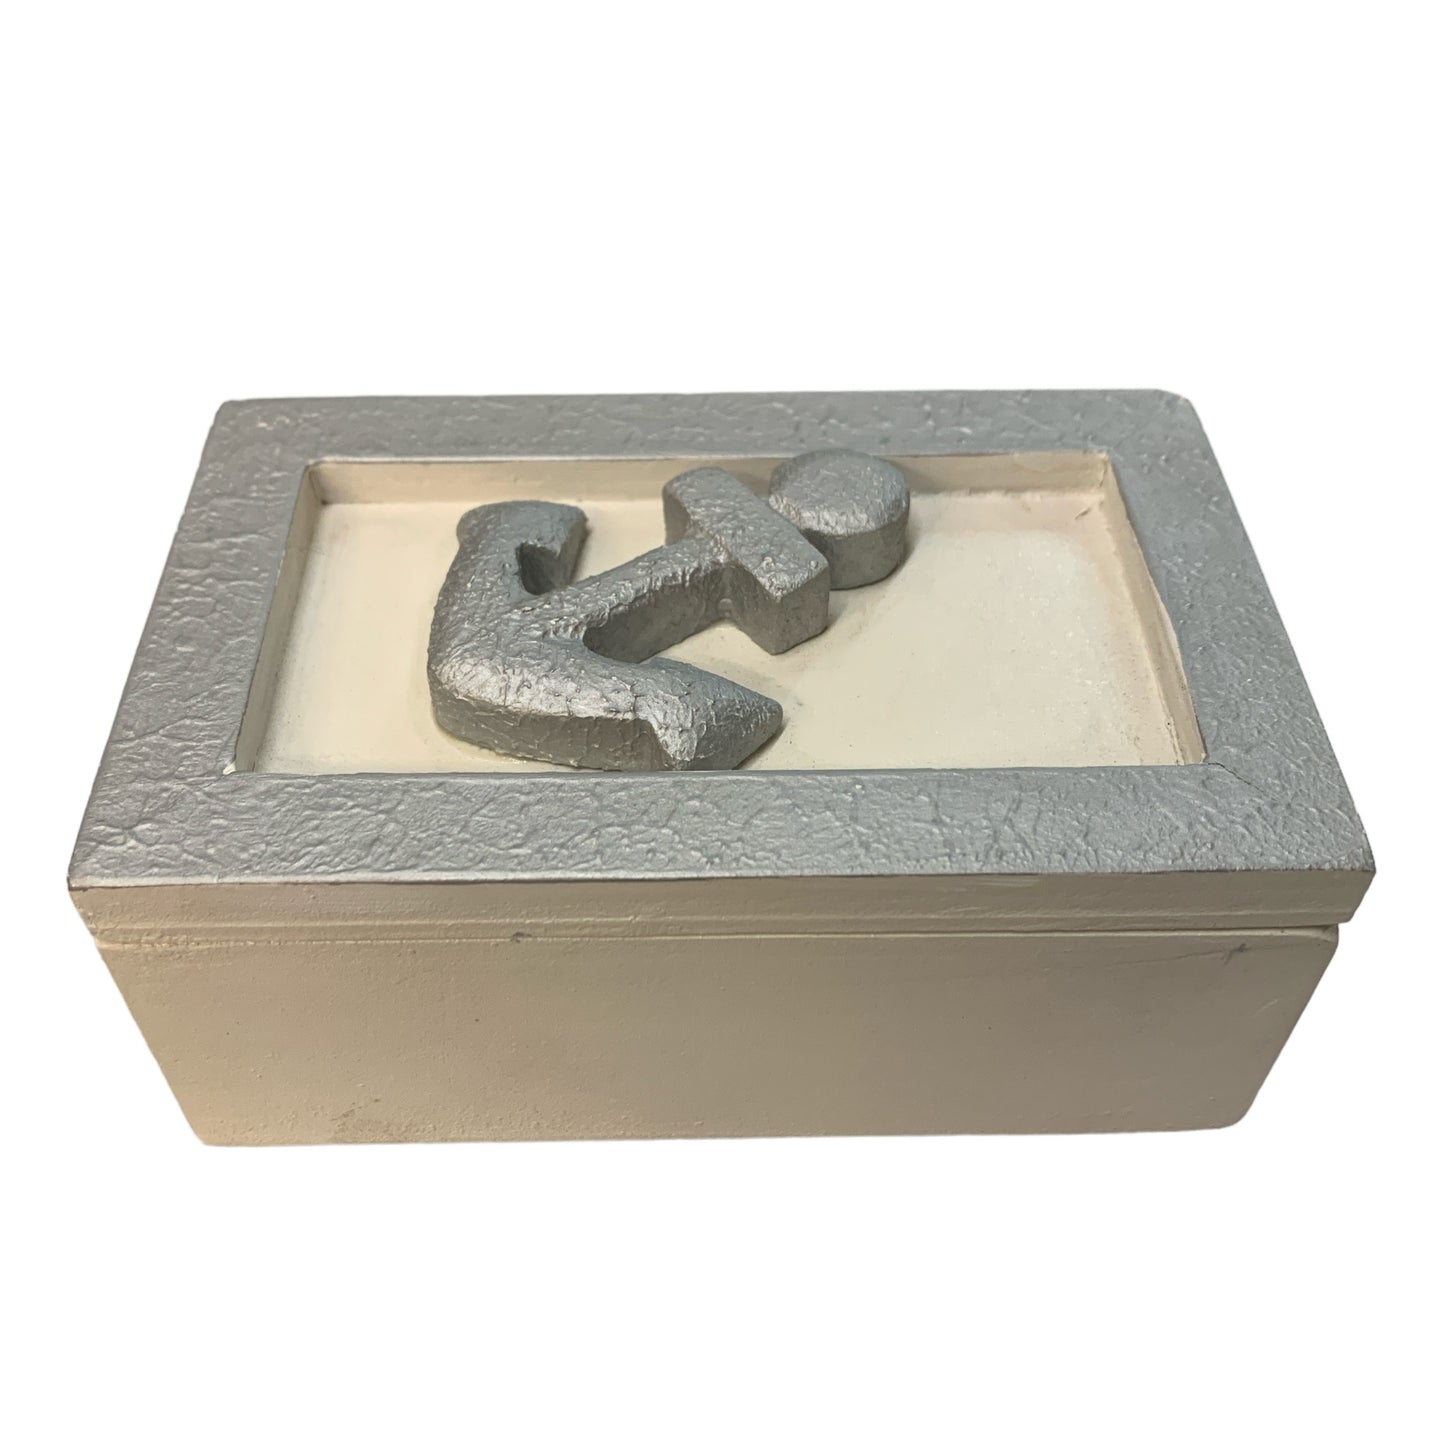 WOODEN JEWELRY BOX- ANCHOR SILVER/WHITE 4.75"x3"x2"